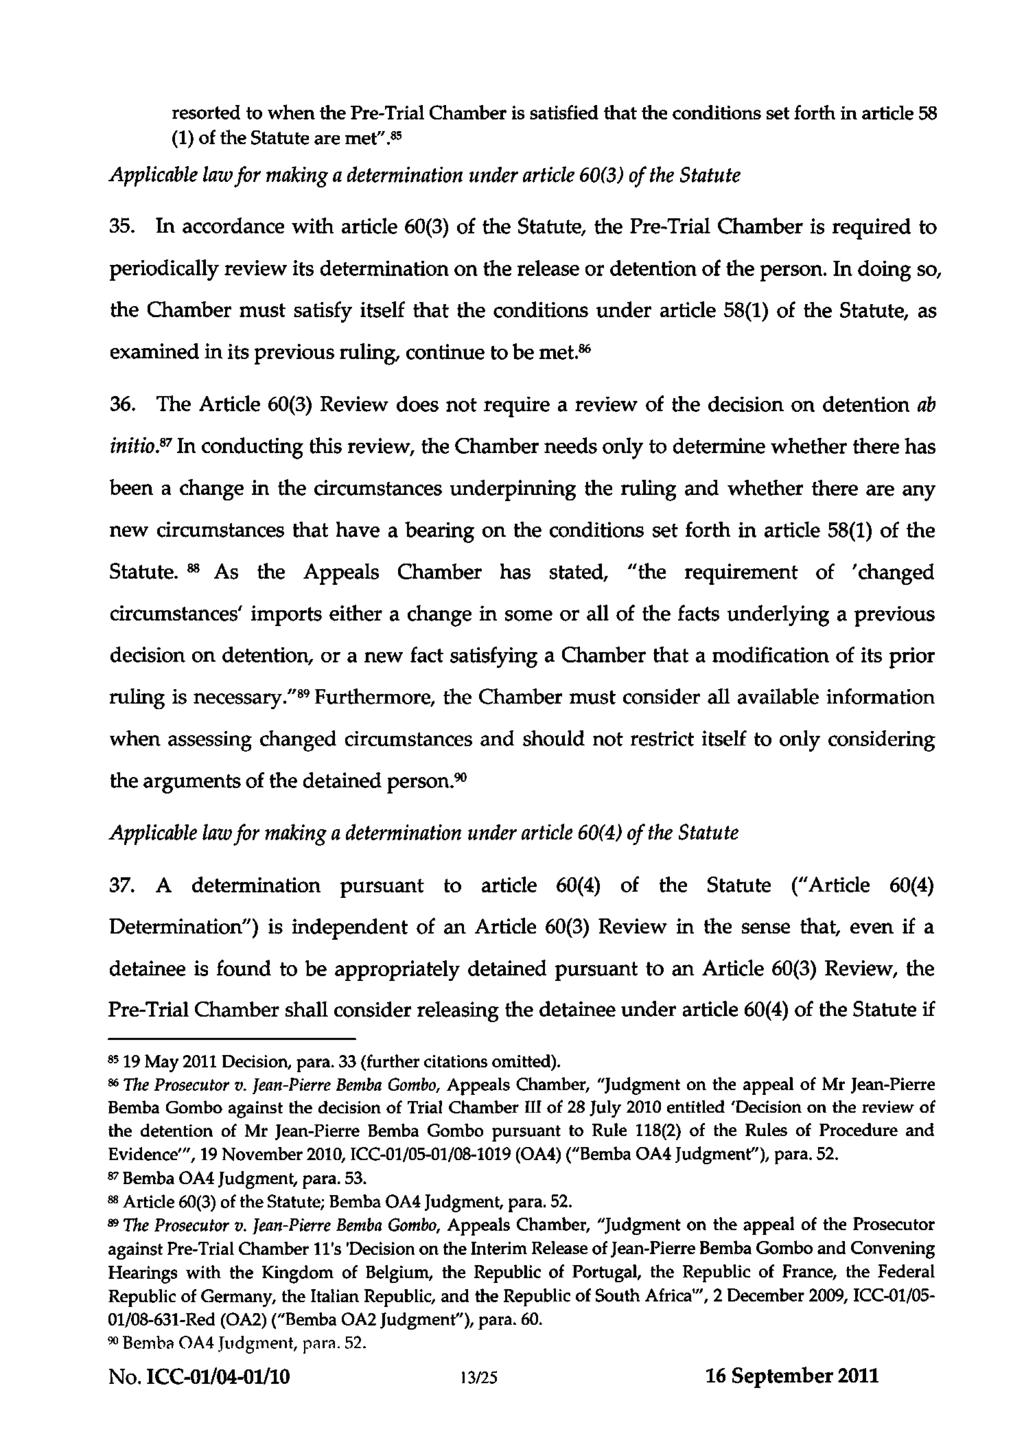 ICC-01/04-01/10-428 16-09-2011 13/25 EO PT resorted to when the Pre-Trial Chamber is satisfied that the conditions set forth in article 58 (1) of the Statute are met".